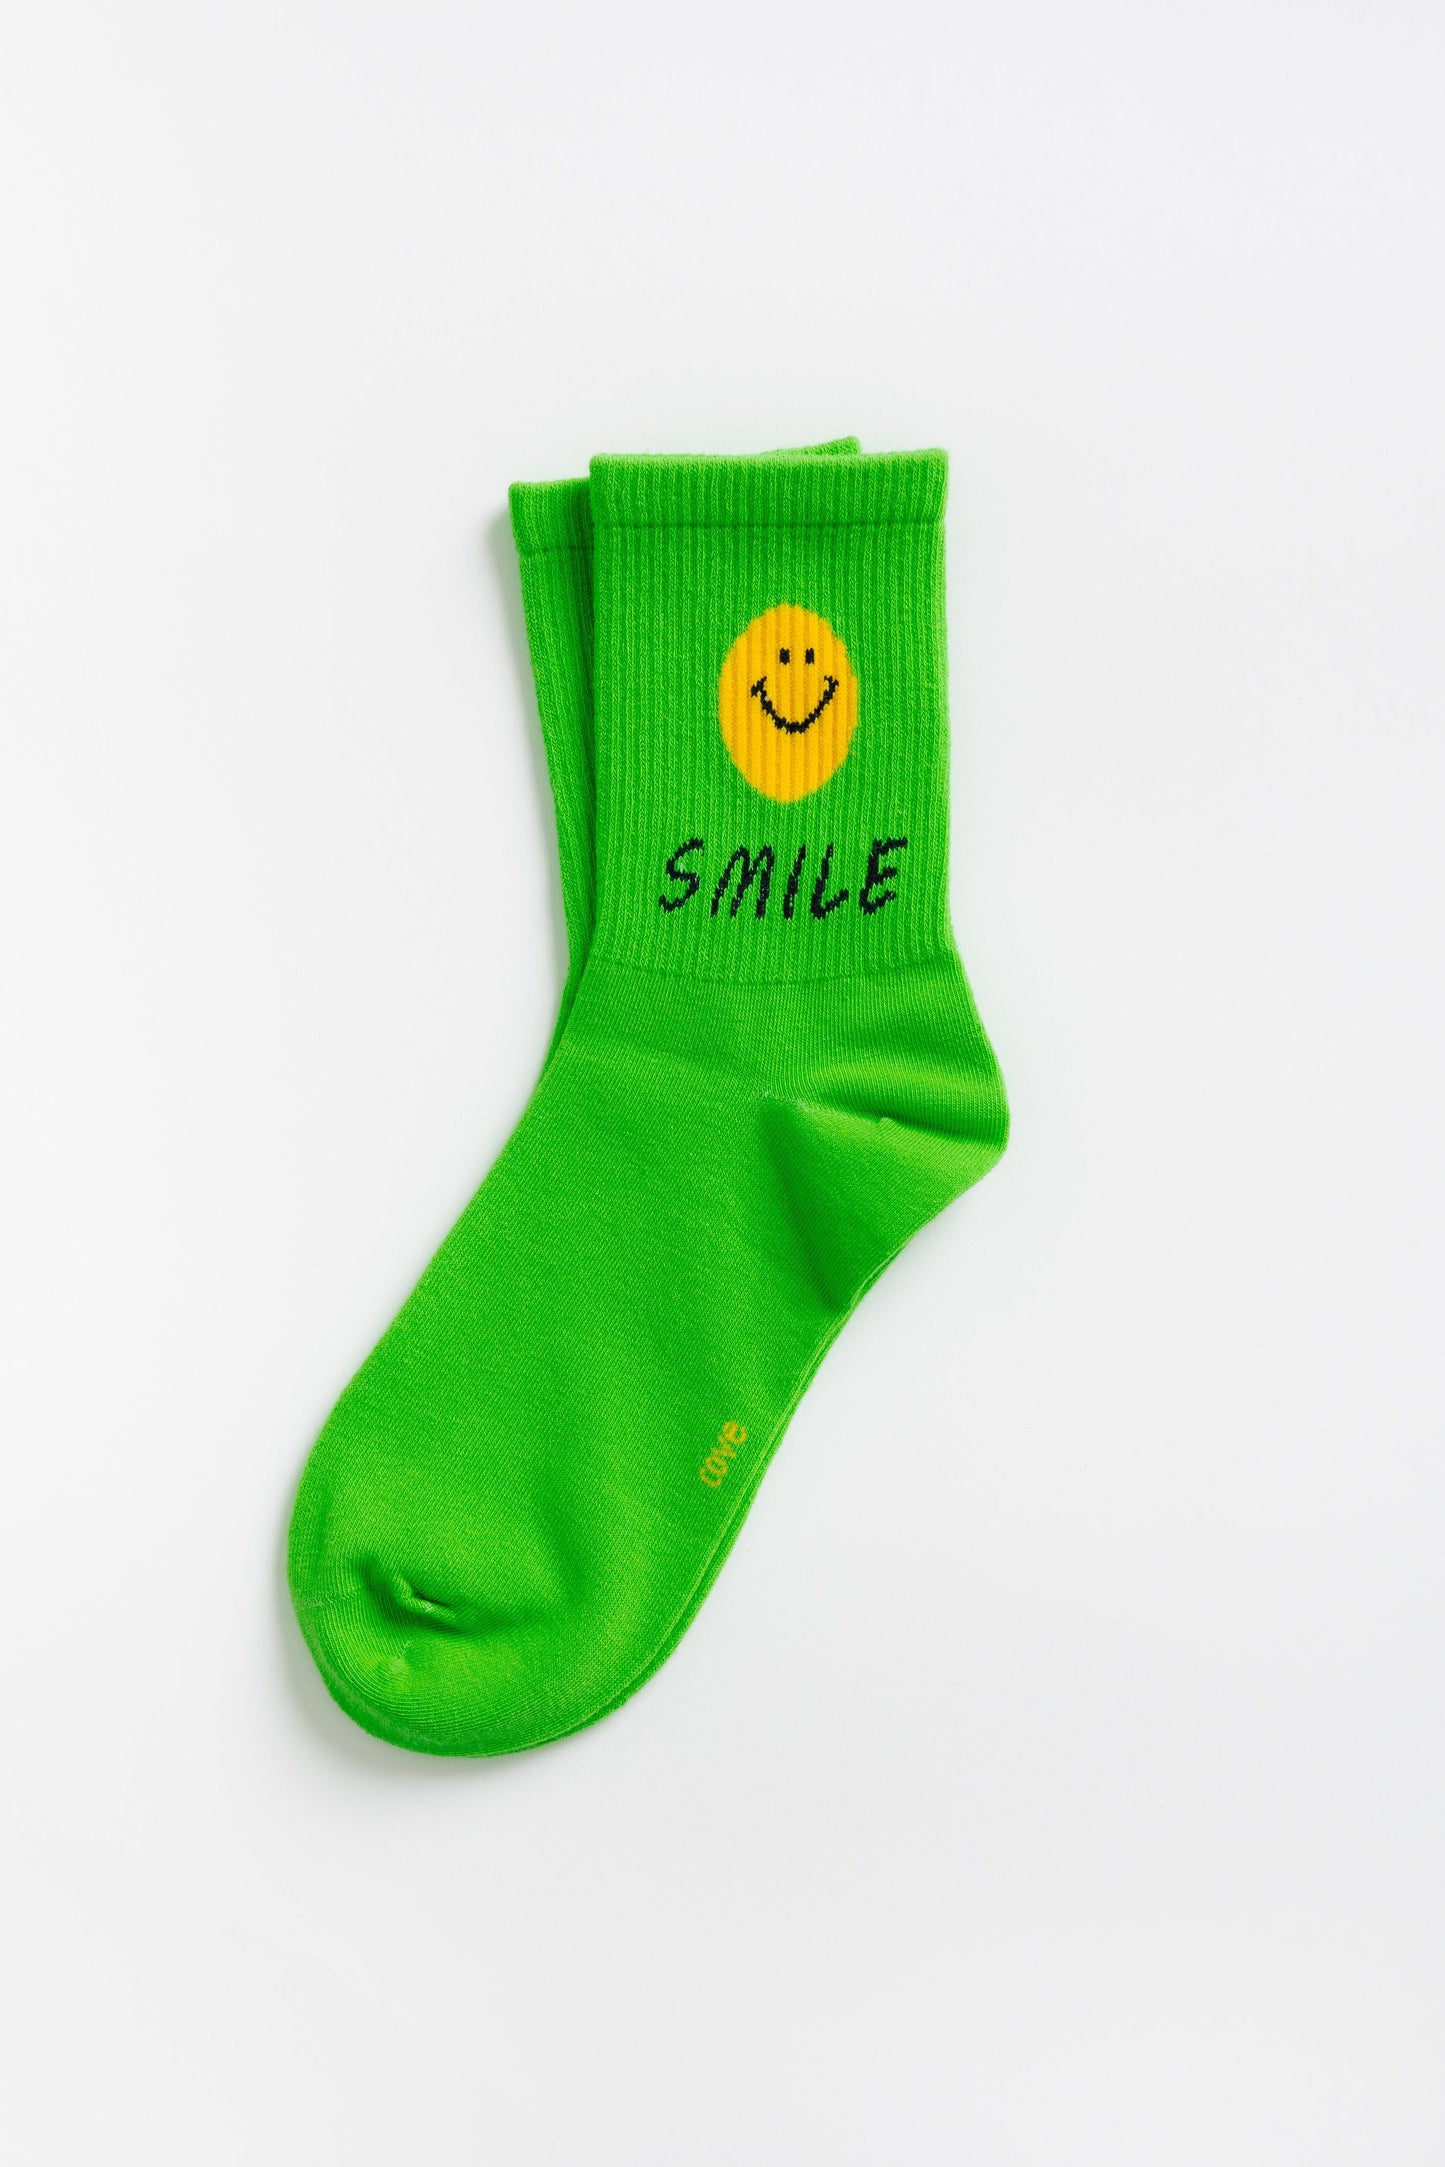 Cove Smile With Me Socks WOMEN'S SOCKS Cove Accessories Lime OS 